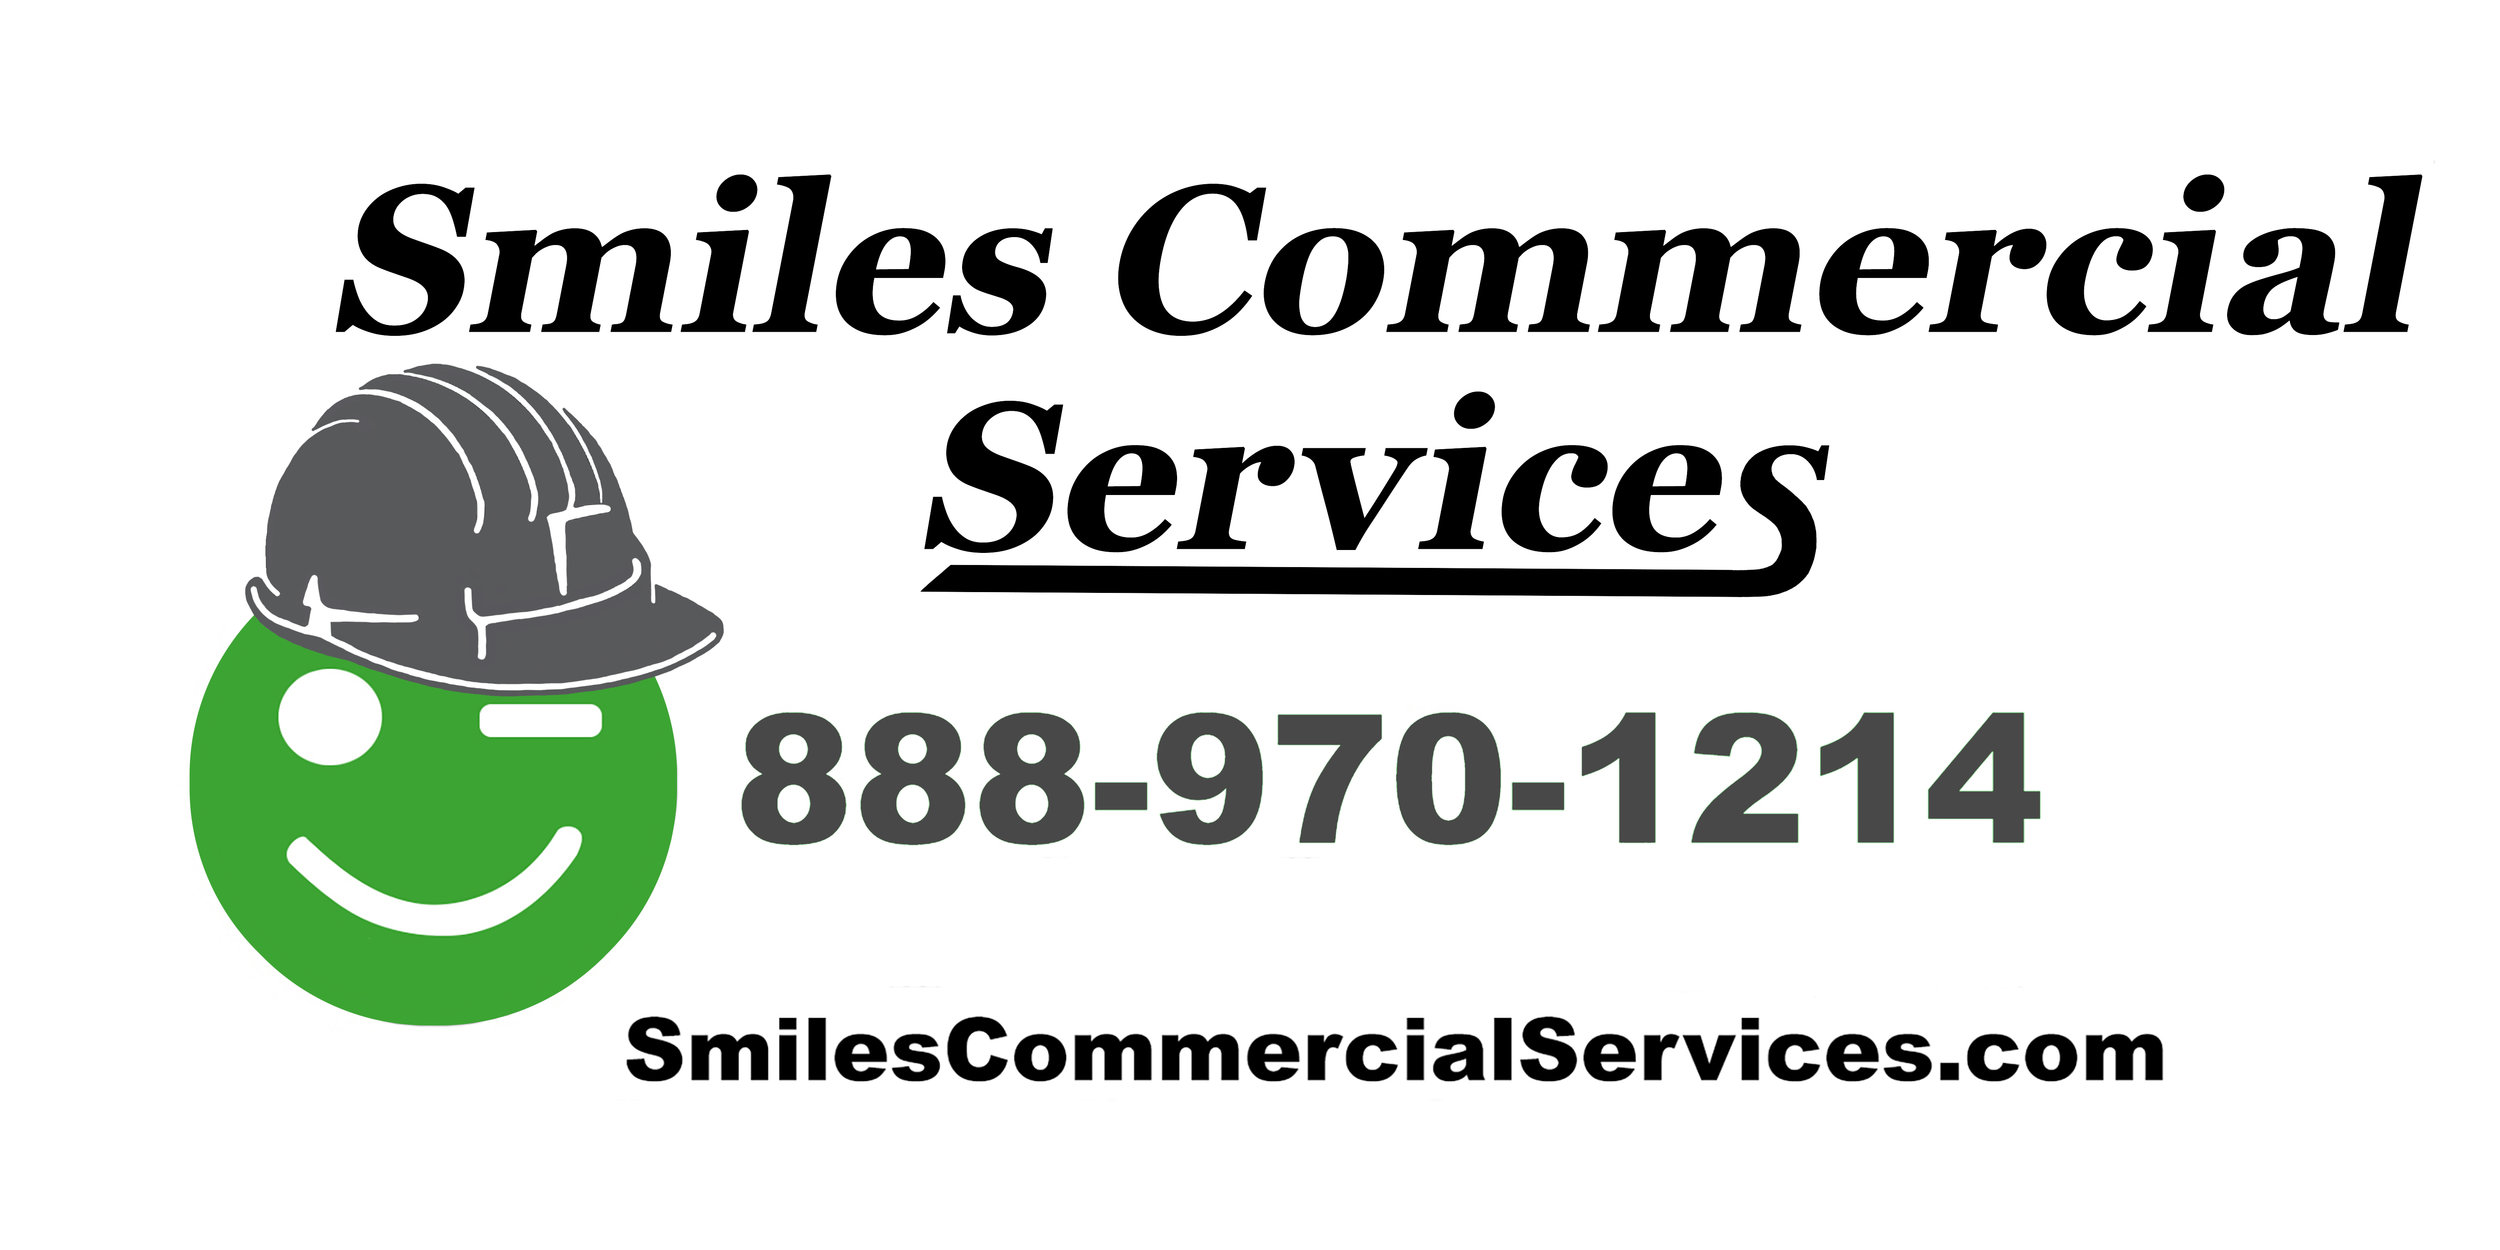 Smiles Commercial Services